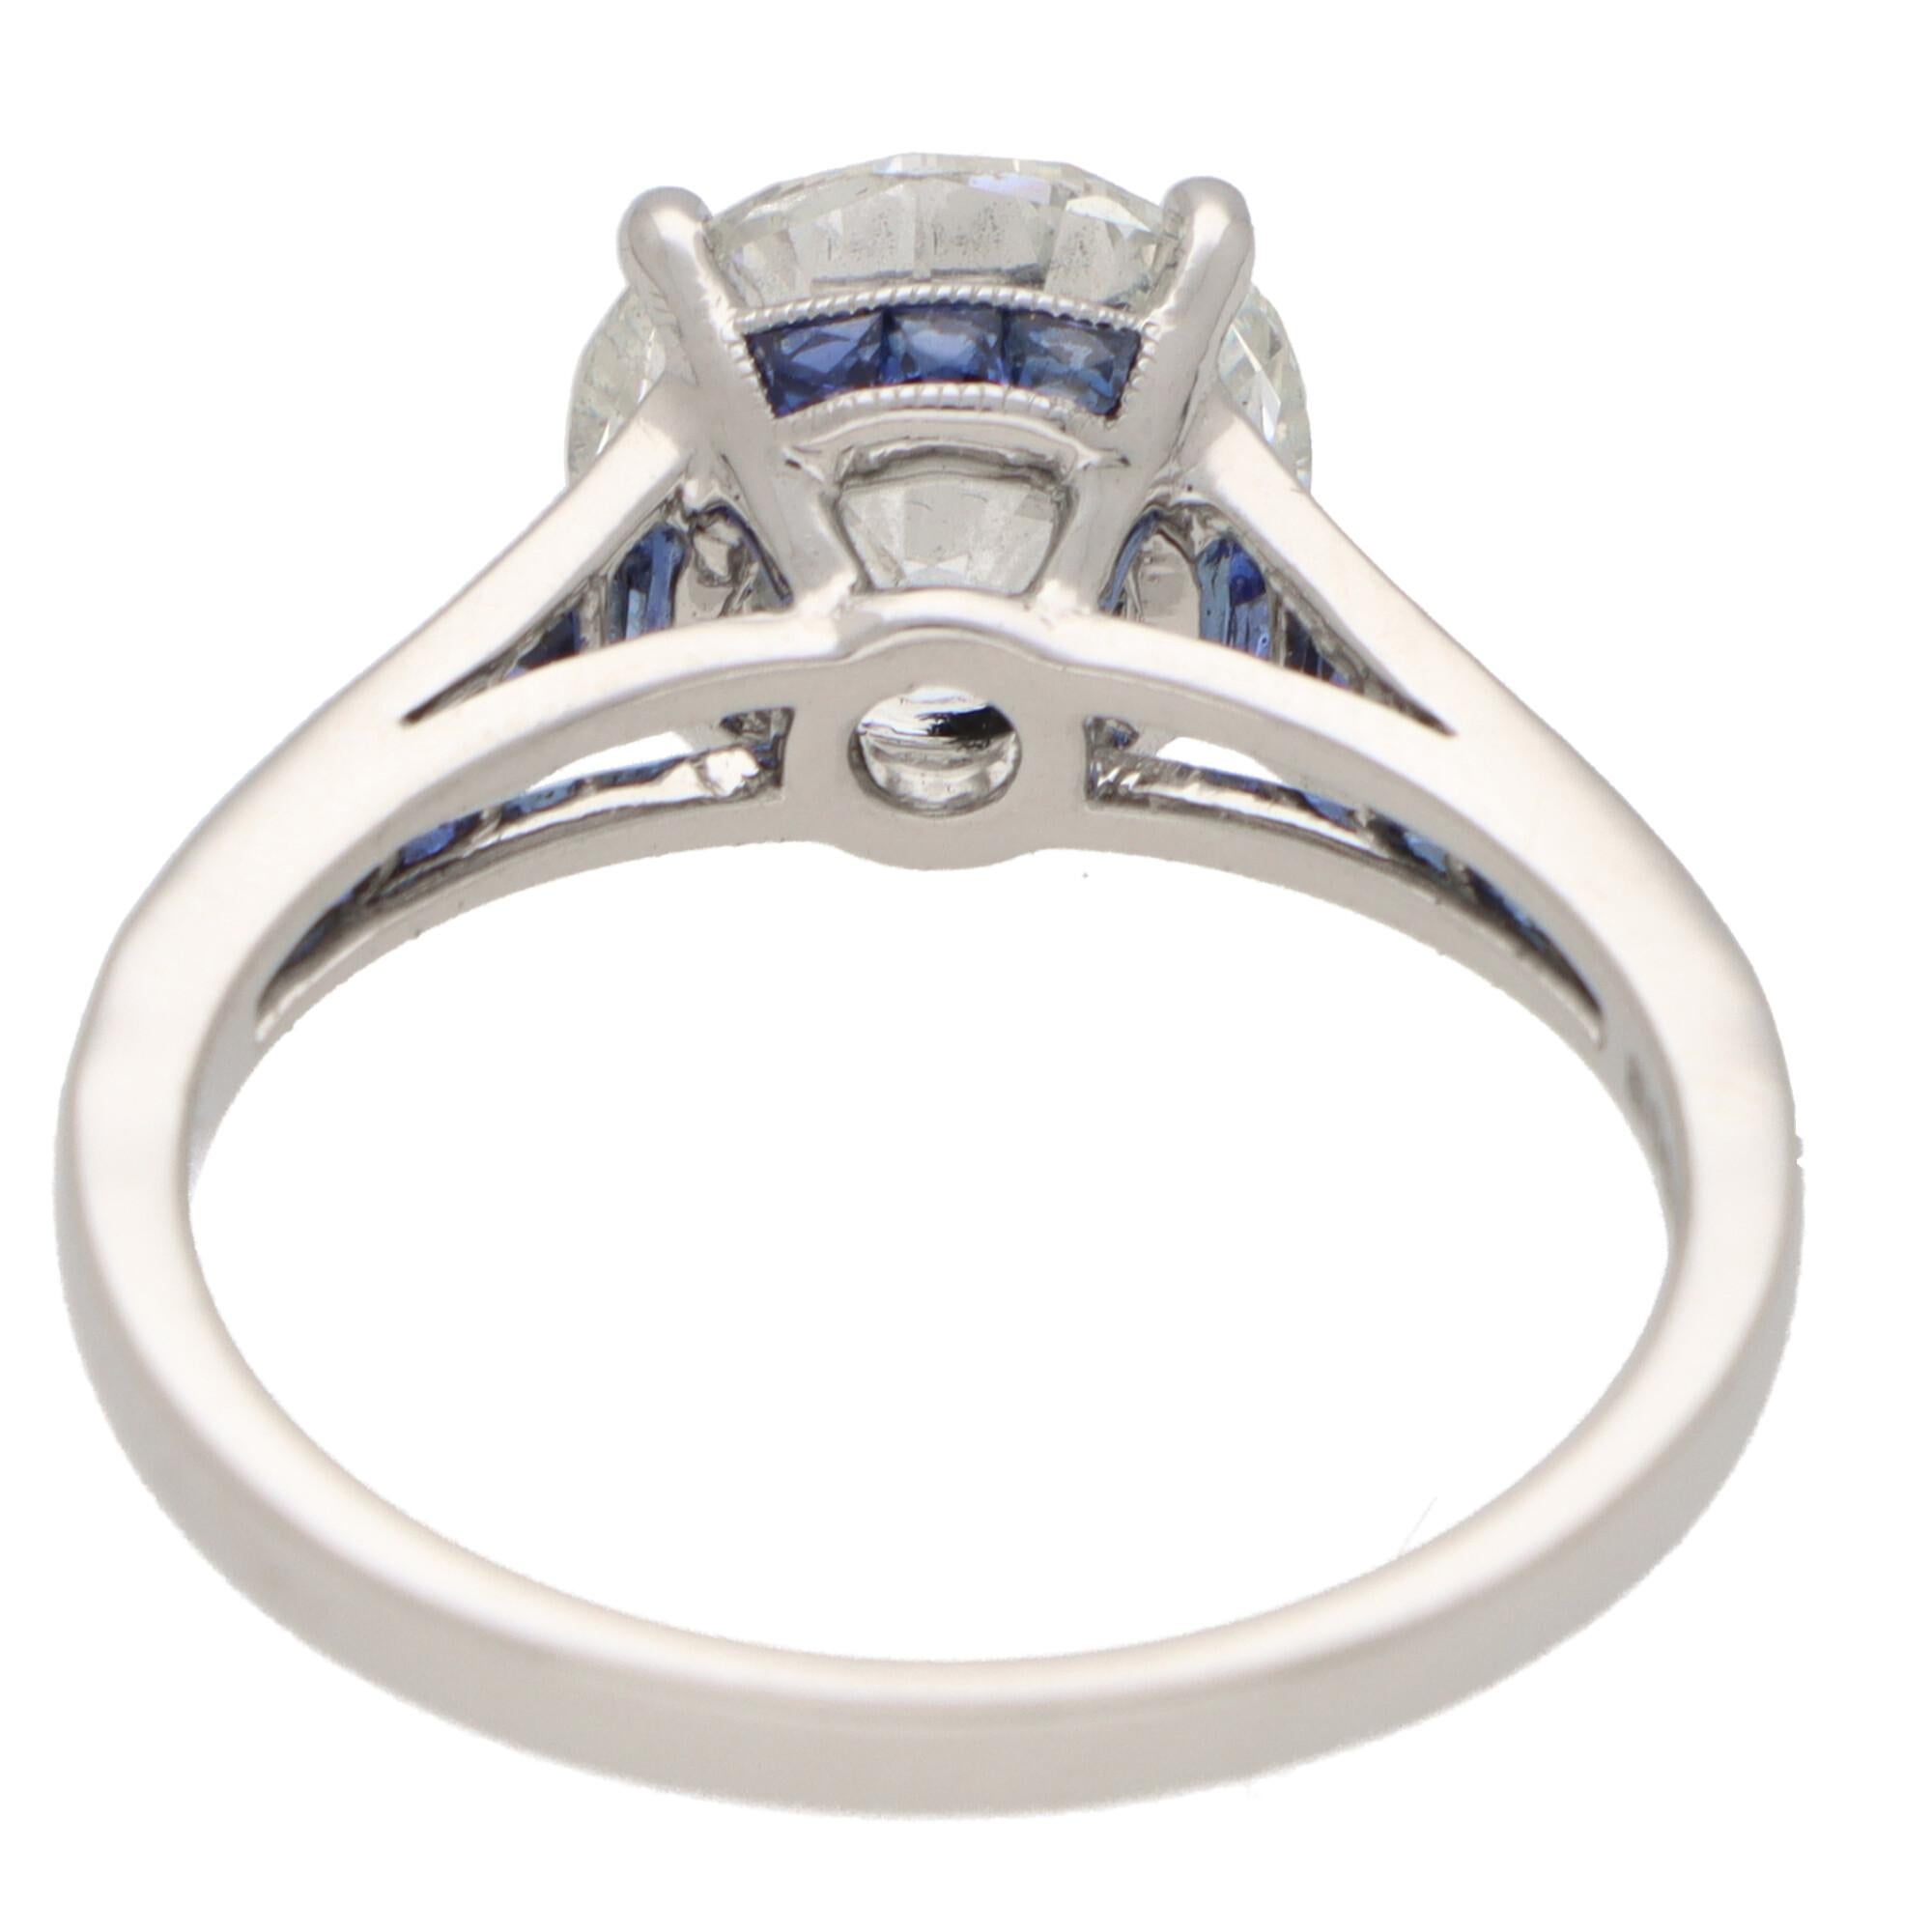 Certified Art Deco Style Diamond and Sapphire Engagement Ring Set in Platinum For Sale 2